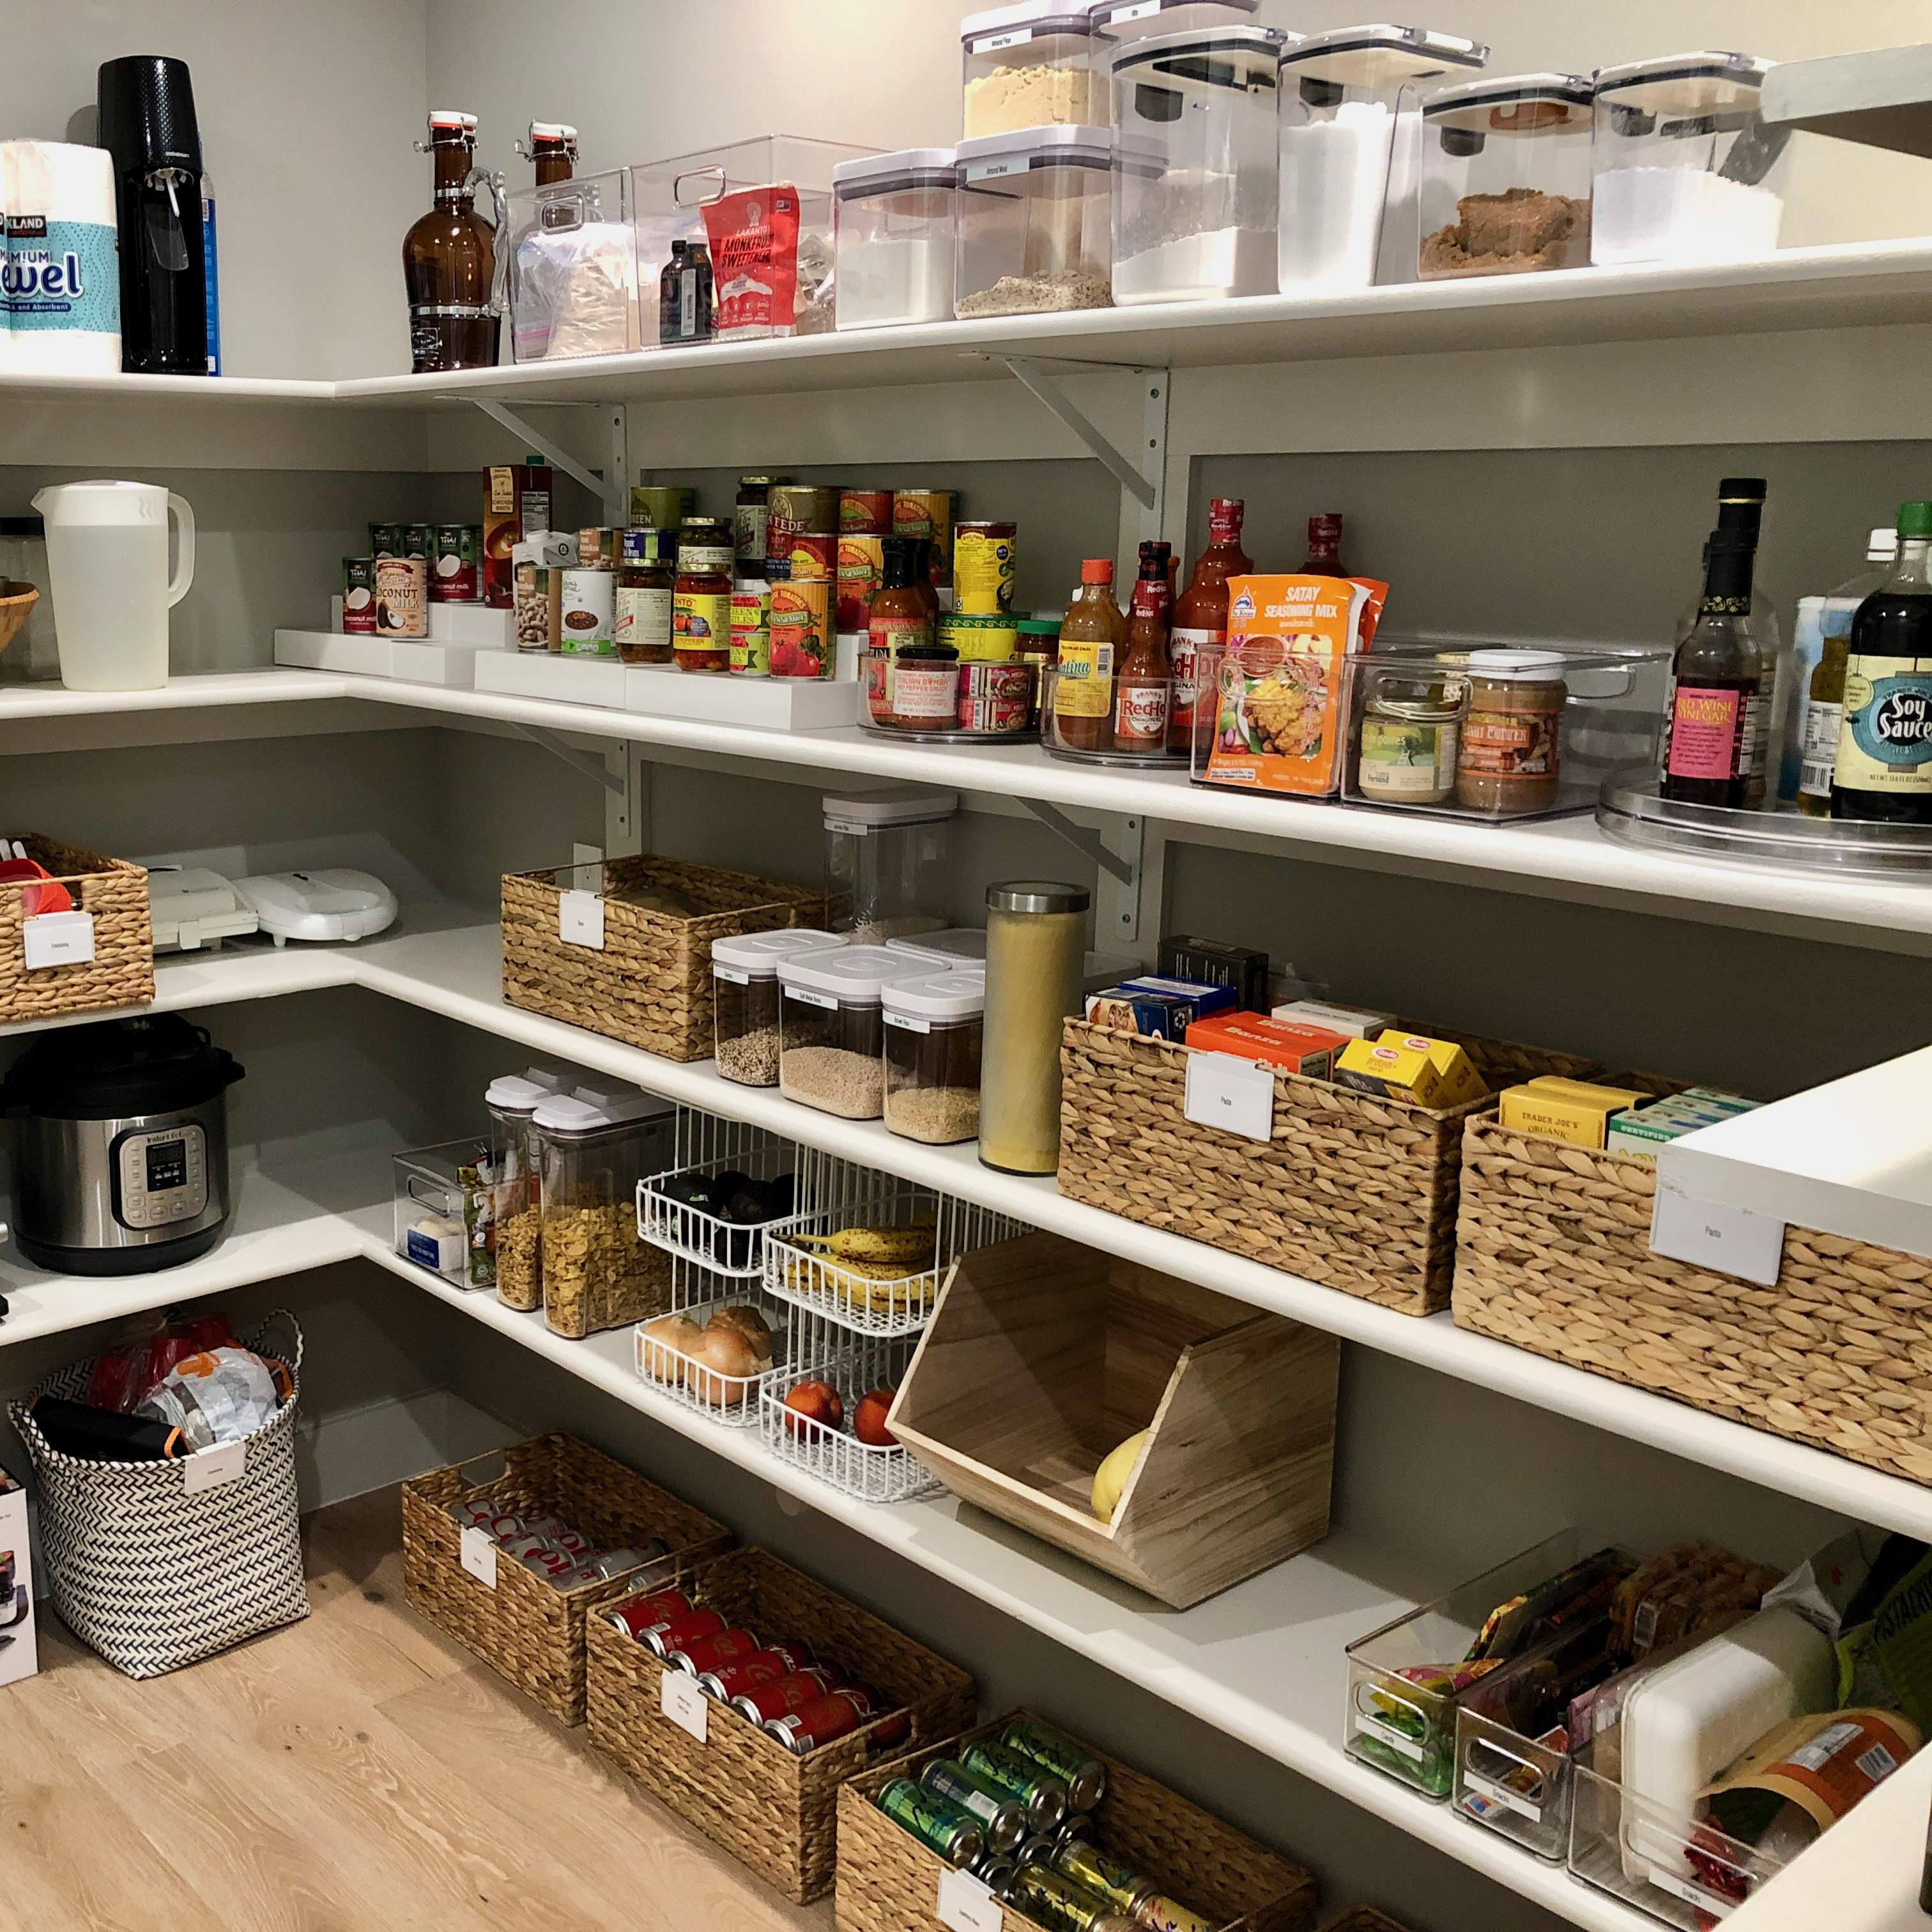 Kitchen pantry with grocery items organized on shelves. Baskets and bins hold various categories